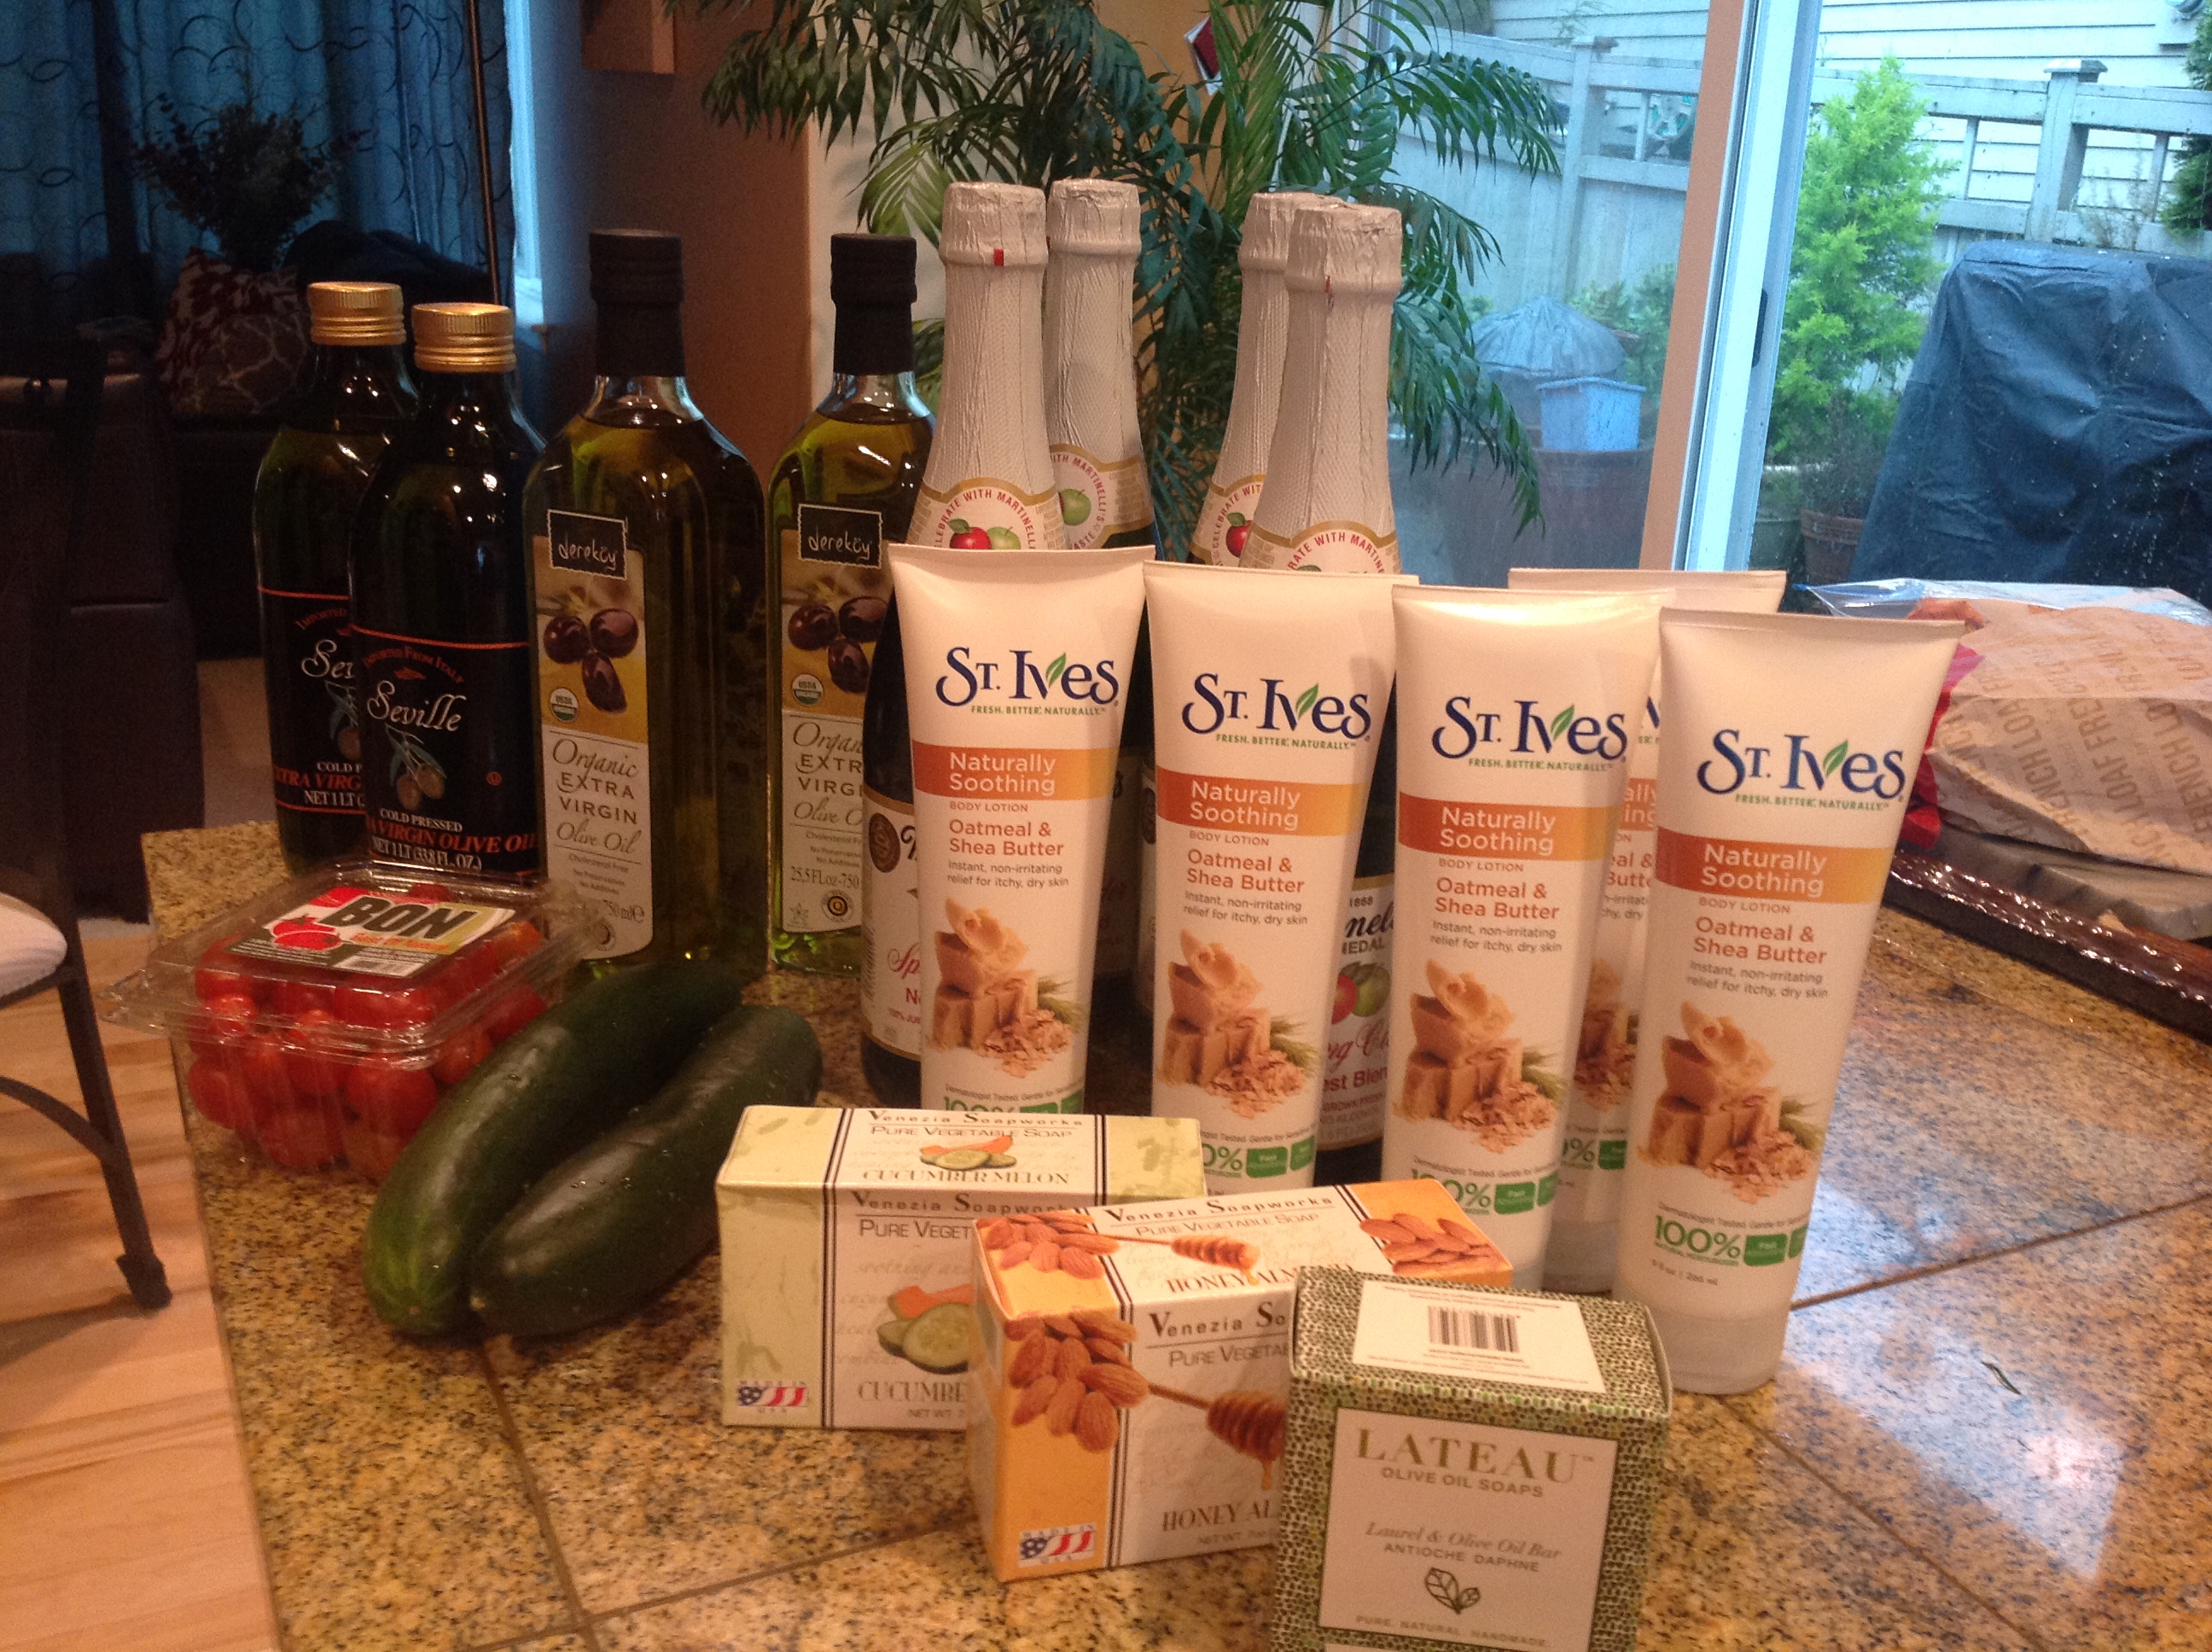 My favorite shopping this week: Grocery outlet! I paid $55, it's a little high but I'm fine with it because I got some good deals on the organic olive oil. Originally they're $17 each but with GO it's $7 so I stocked up on that. 